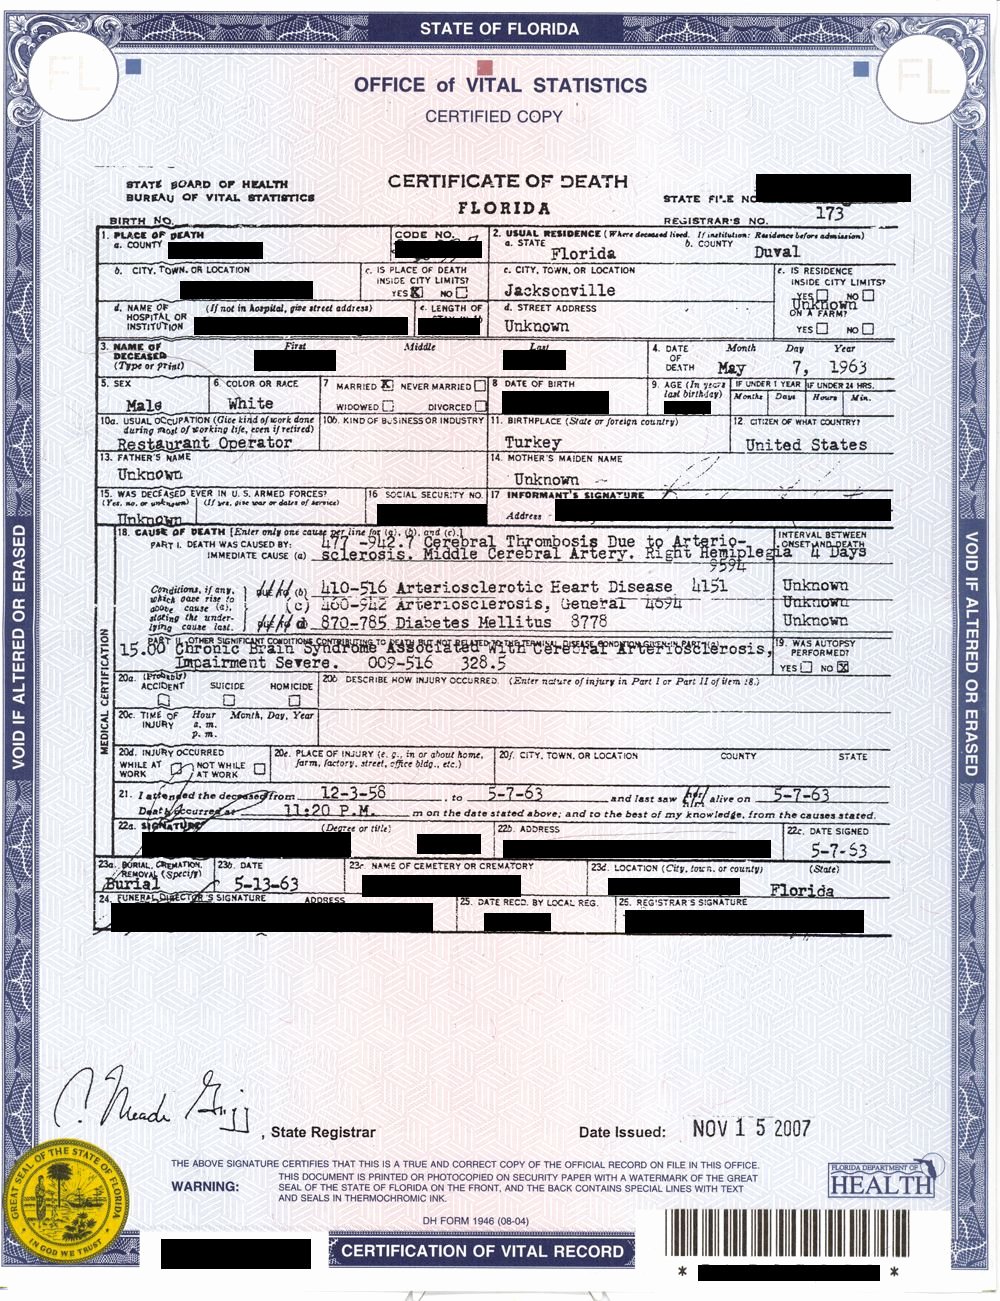 Florida Death Certificate Sample Best Of How to A Florida Death Certificate Senior Justice